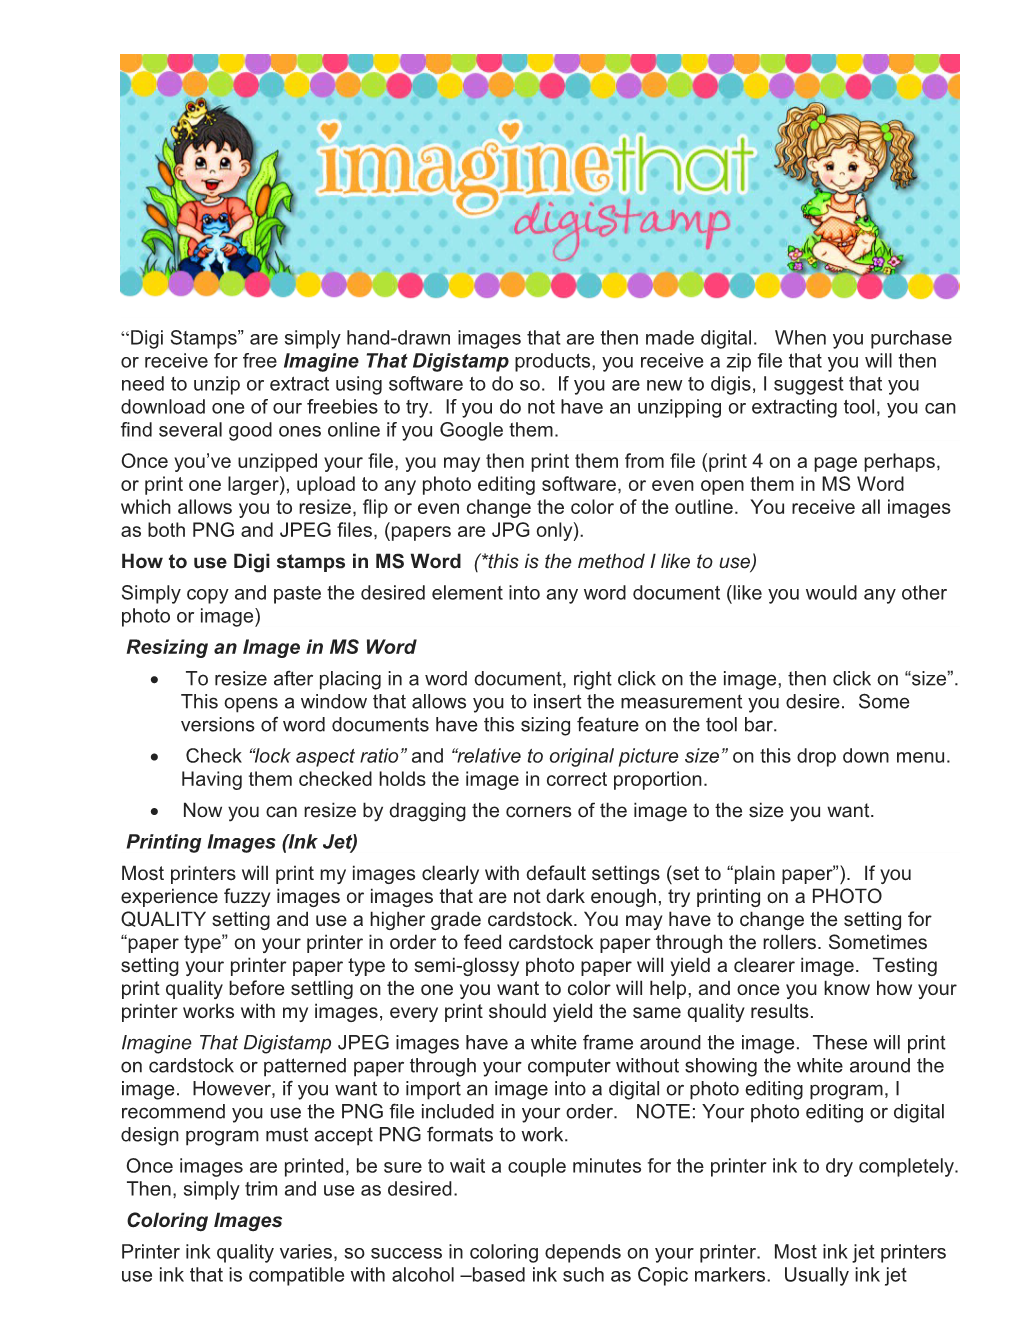 How to Use Digi Stamps in MS Word (*This Is the Method I Like to Use)